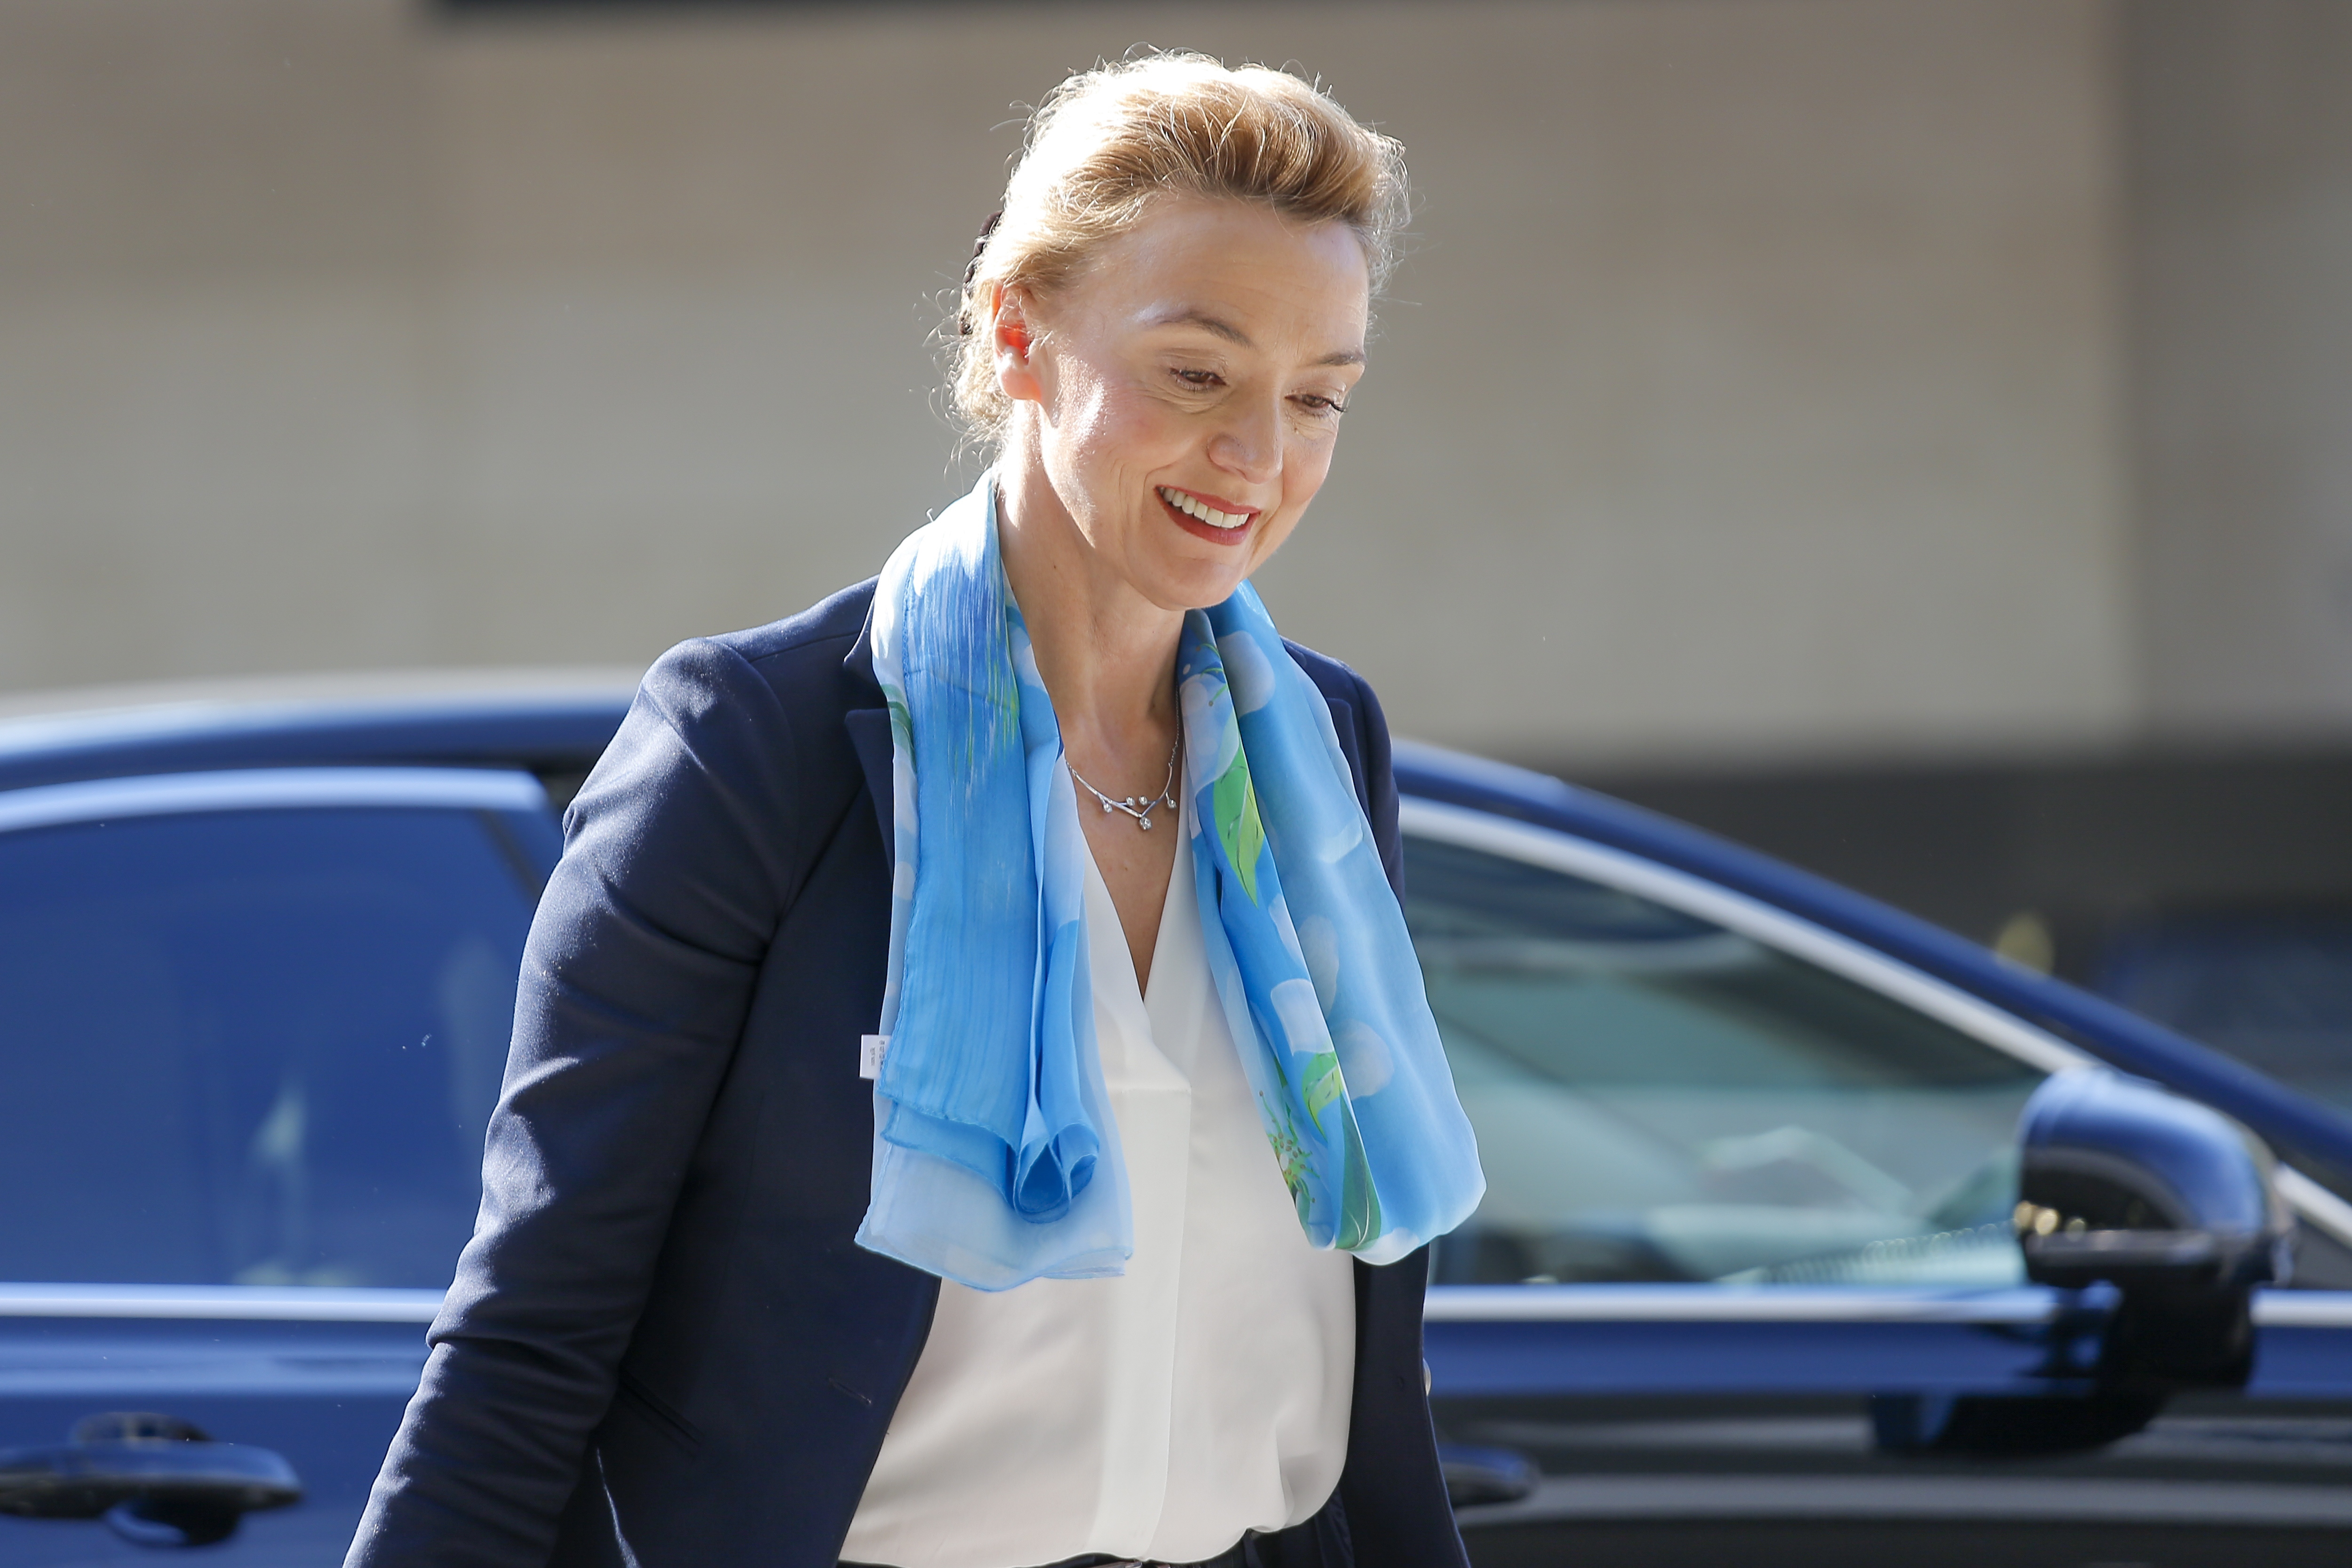 epa07655028 Croatian Foreign Minister Marija Pejcinovic Buric arrives for the General Affairs Council (GAC) in Luxembourg, 18 June 2019. The council will hold a policy debate on the next multiannual financial framework (MFF) and ministers will prepare for the European Council meeting scheduled for 20-21 June 2019.  EPA/JULIEN WARNAND